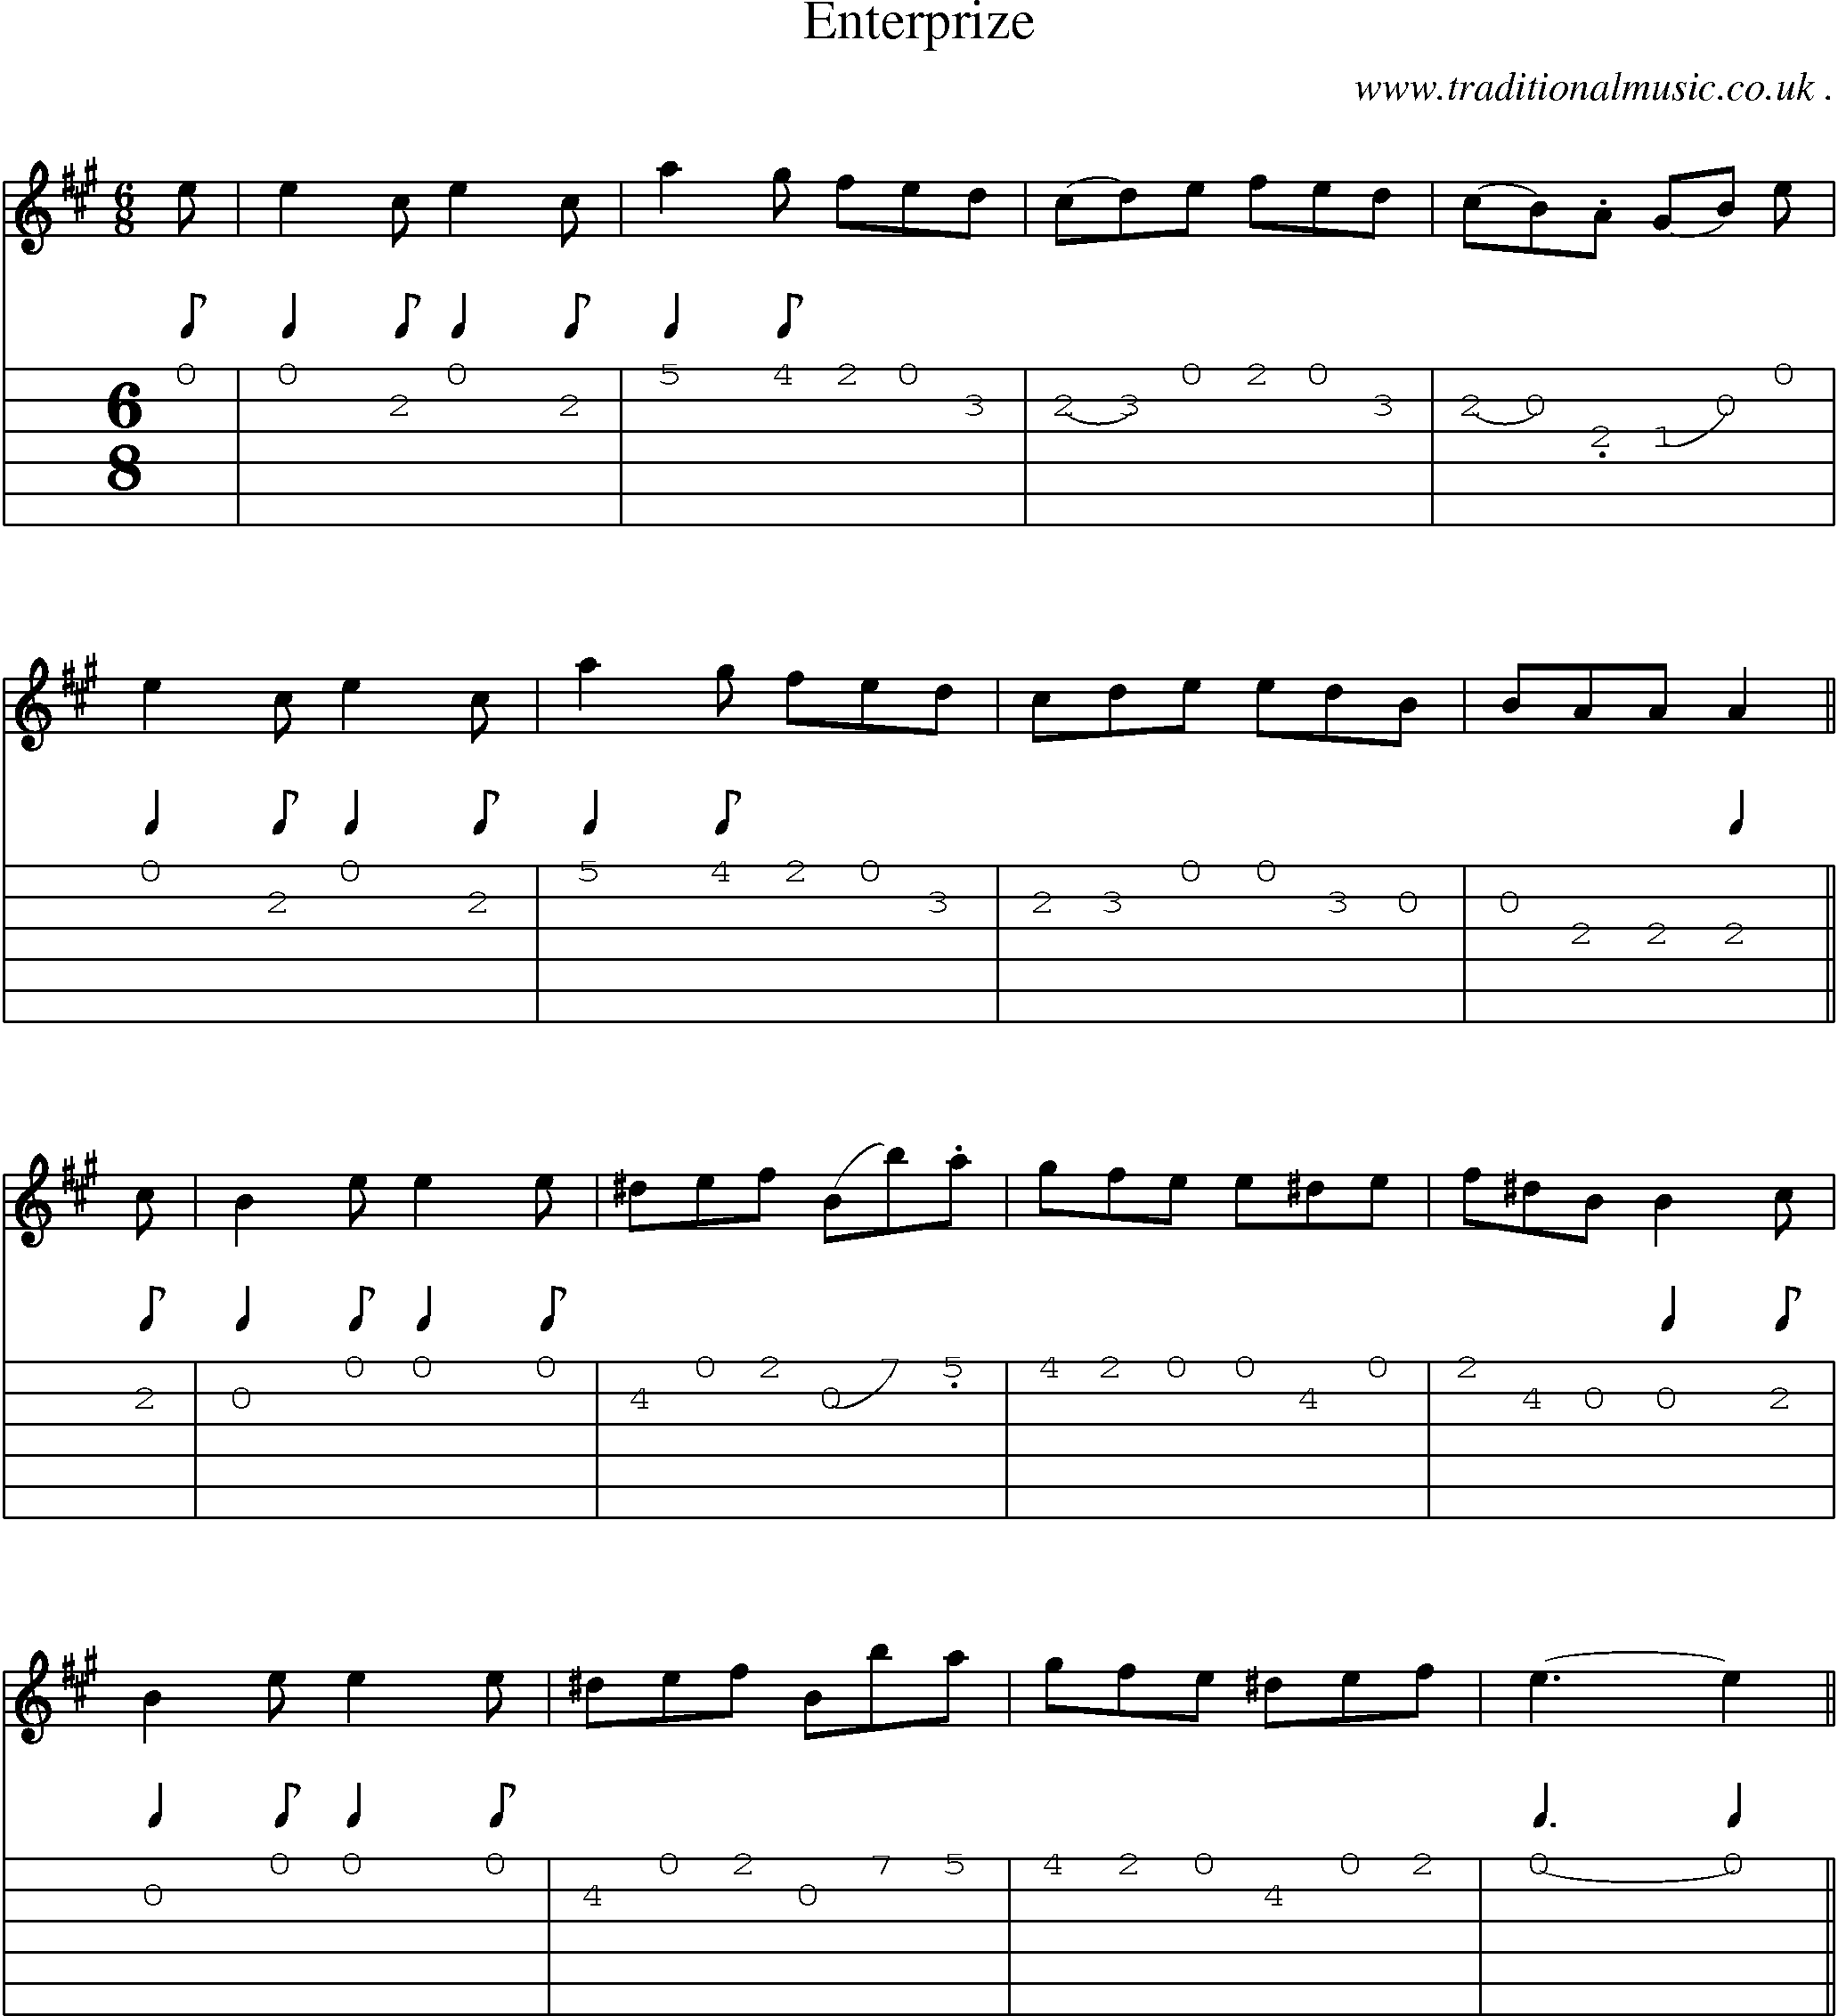 Sheet-Music and Guitar Tabs for Enterprize